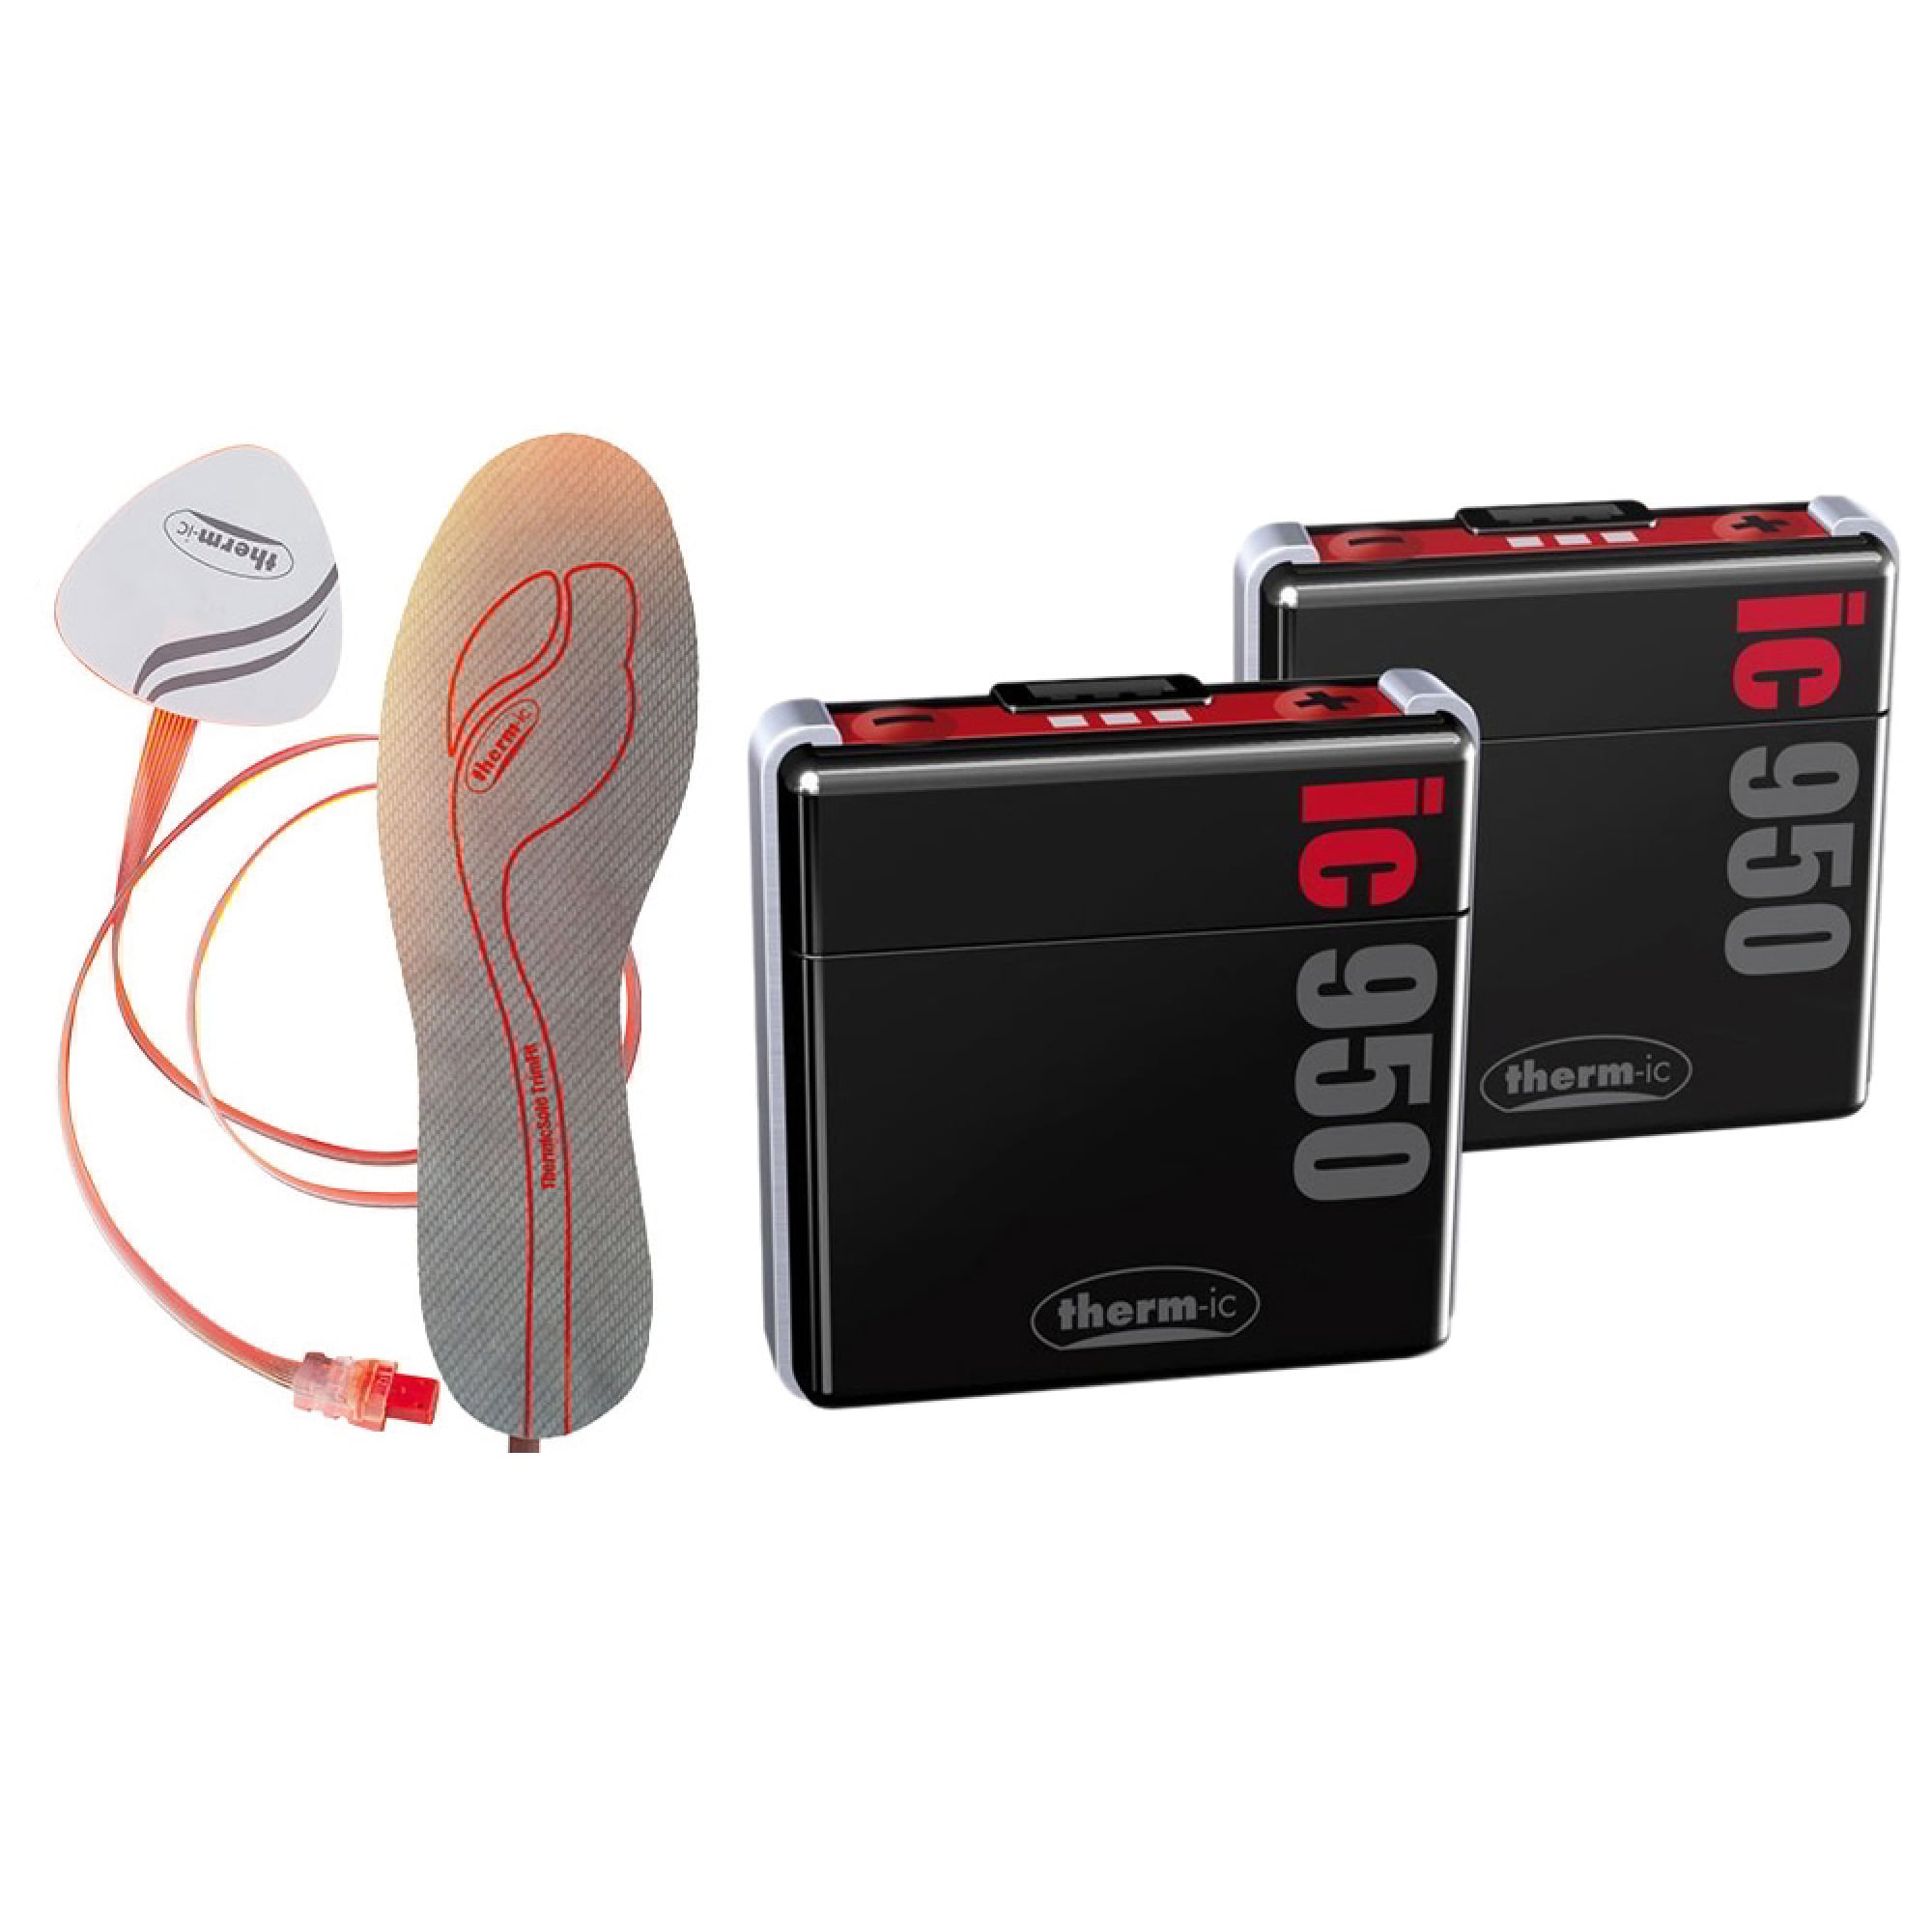 Therm-ic Smart Pack Set IC 950 Foot Warmer with Trim Fit Insoles